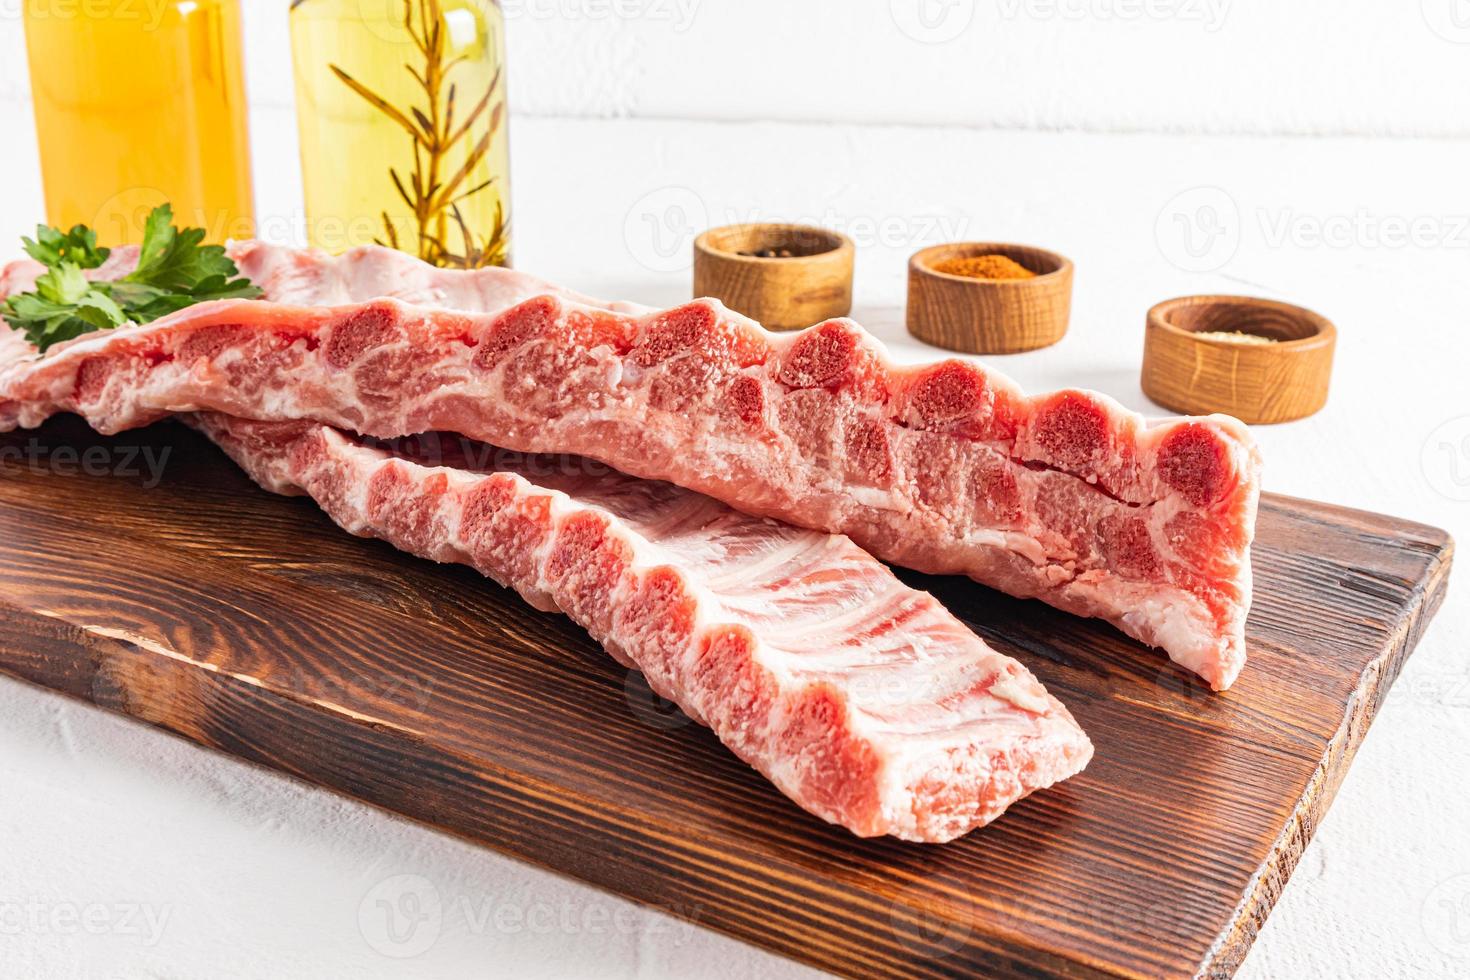 front view of juicy raw pork ribs on a cutting board. white background. spices for grilling ribs. photo